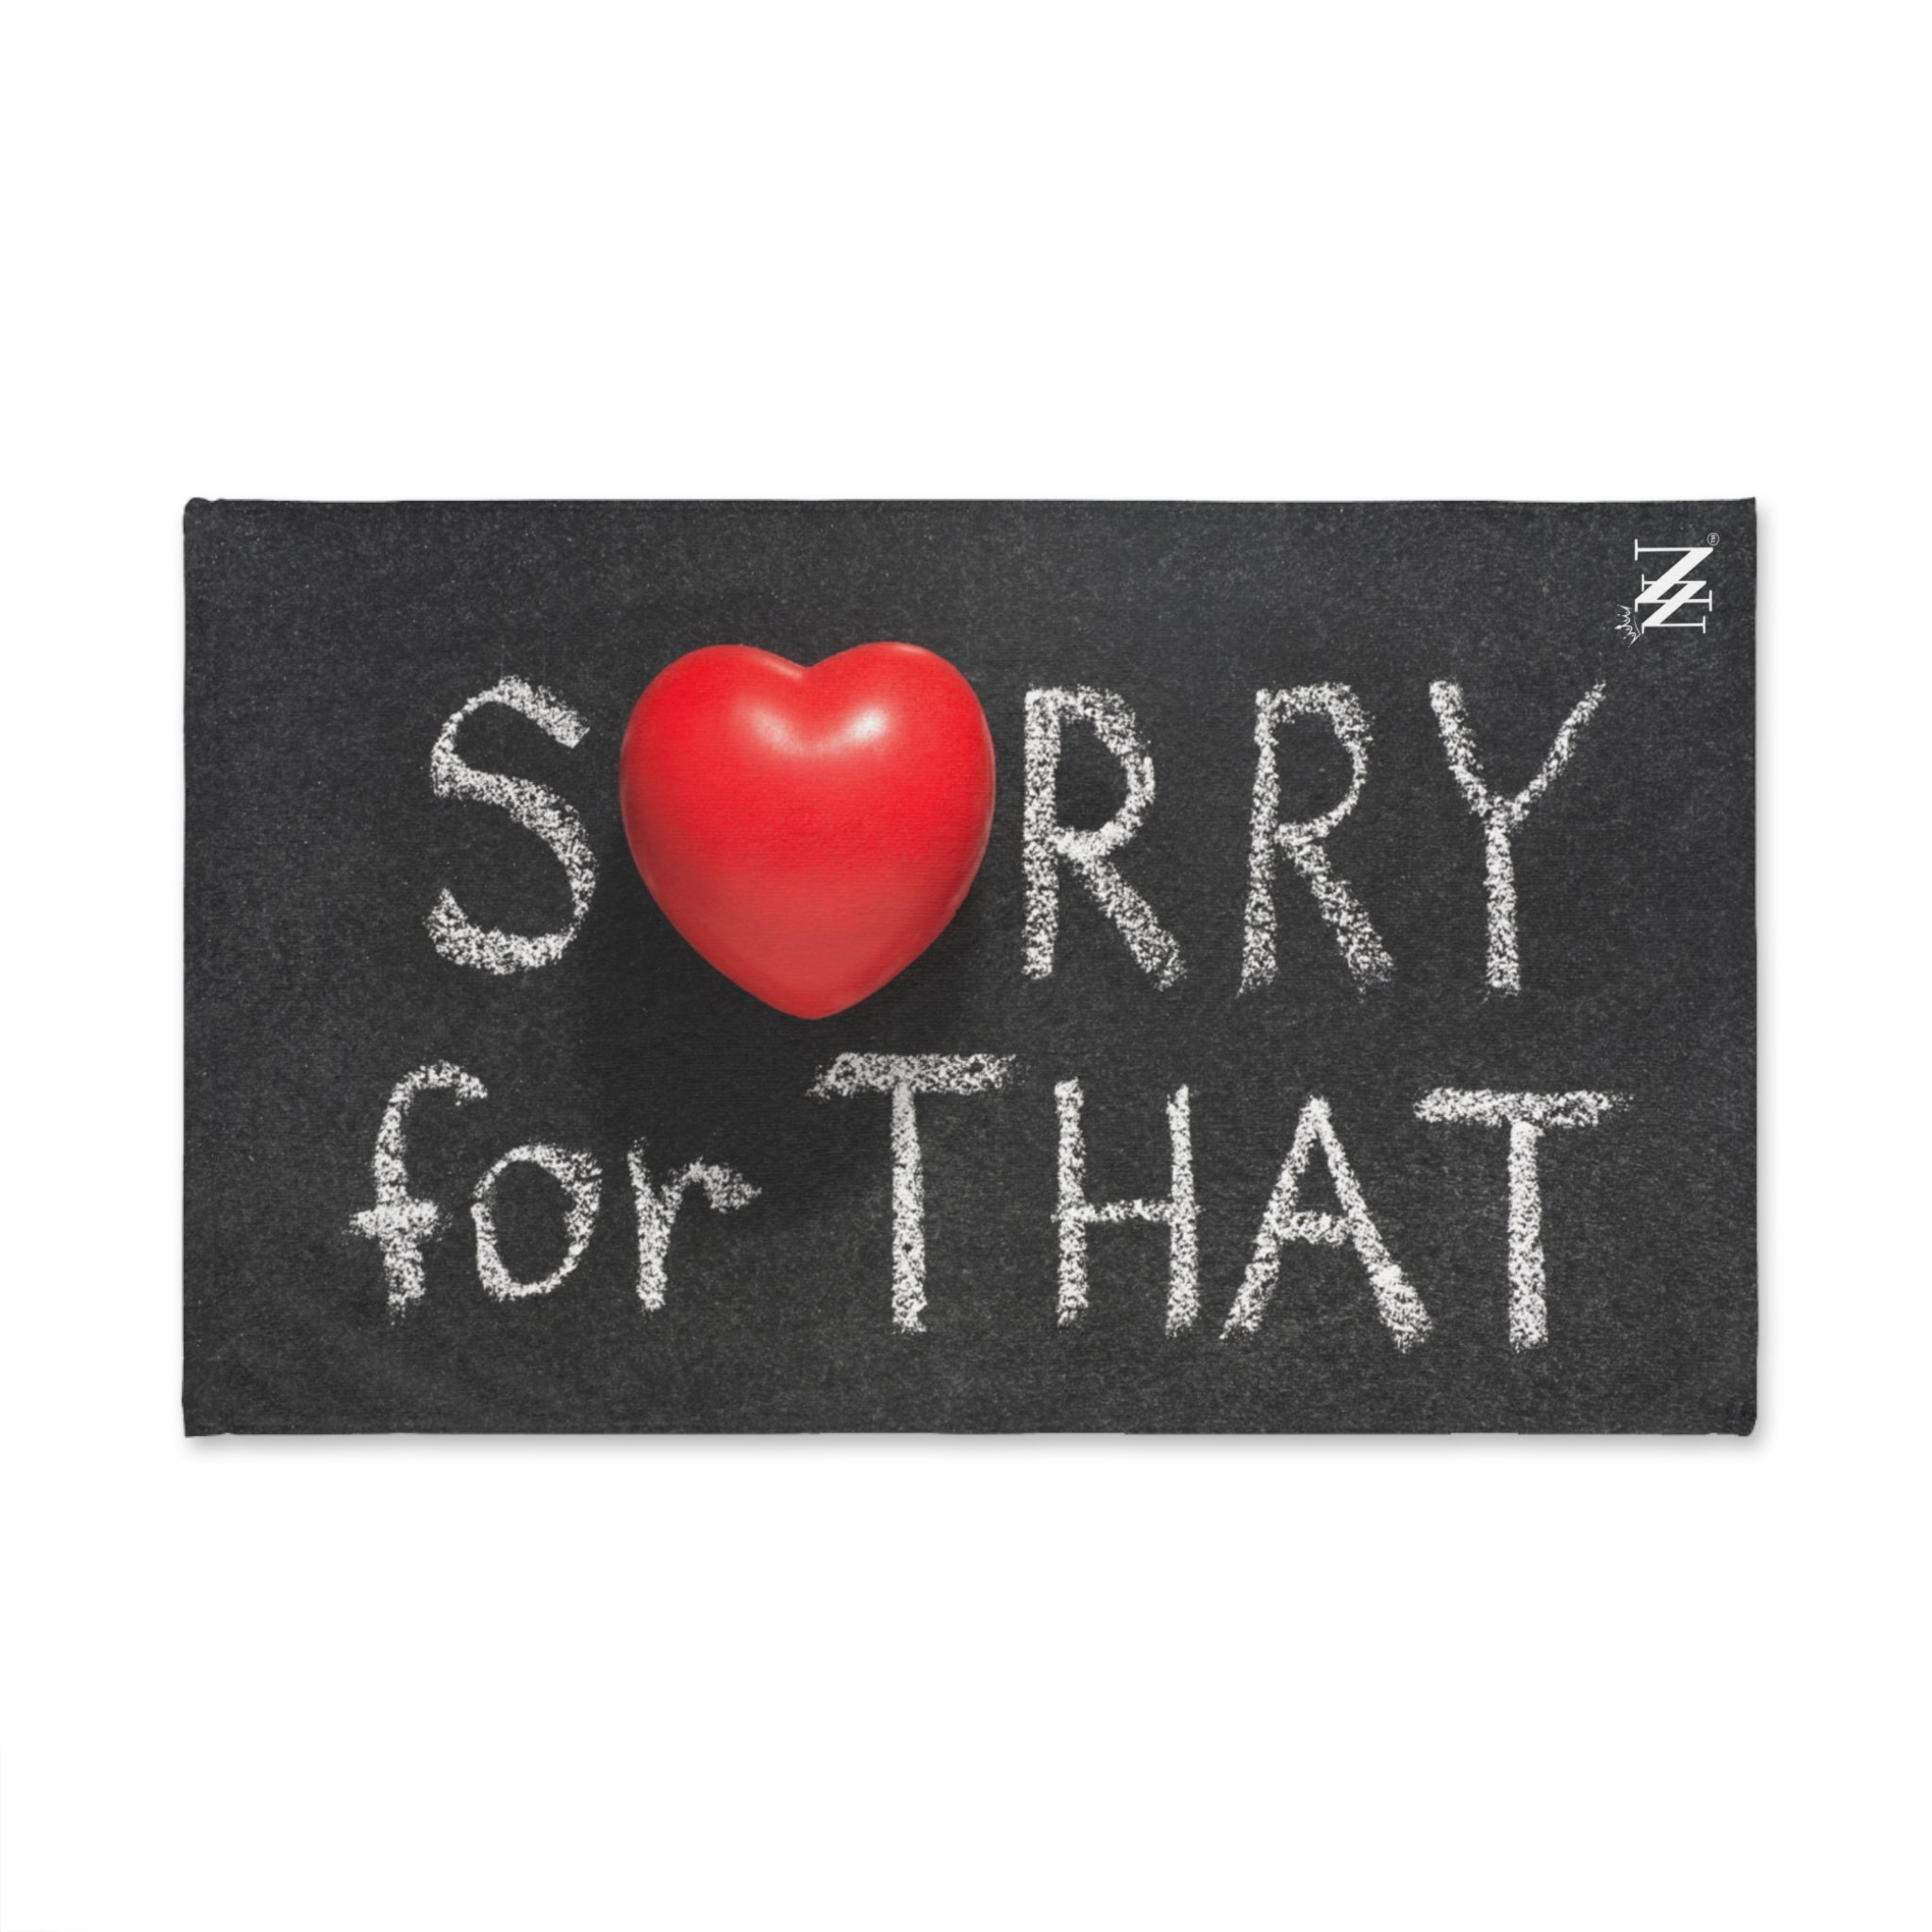 Sorry Apology Heart White | Funny Gifts for Men - Gifts for Him - Birthday Gifts for Men, Him, Her, Husband, Boyfriend, Girlfriend, New Couple Gifts, Fathers & Valentines Day Gifts, Christmas Gifts NECTAR NAPKINS